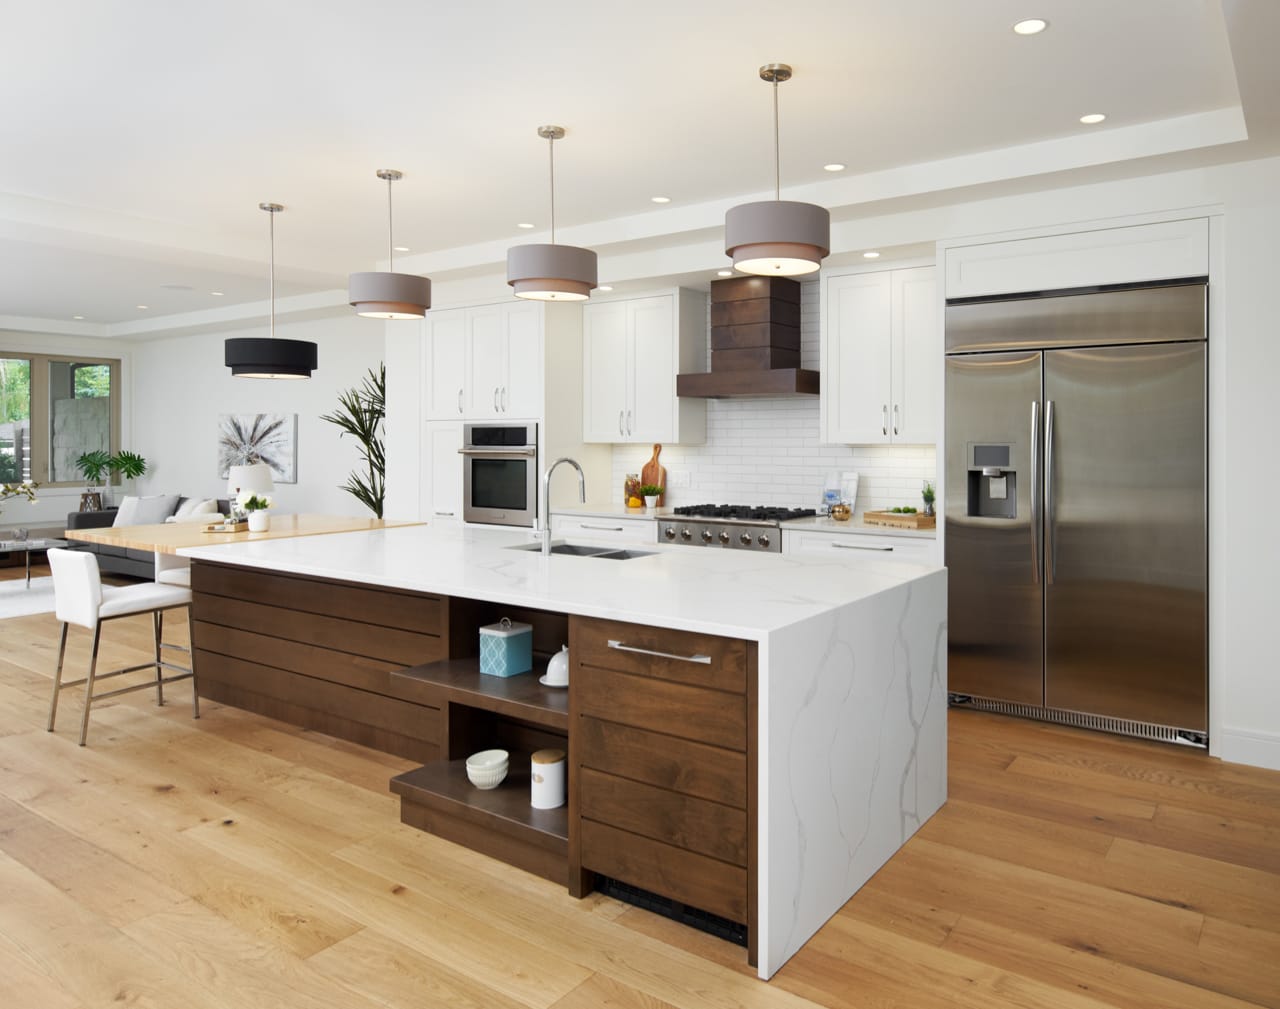 Transistional kitchen with oversized island with shiplap detailing and a white waterfall countertop.